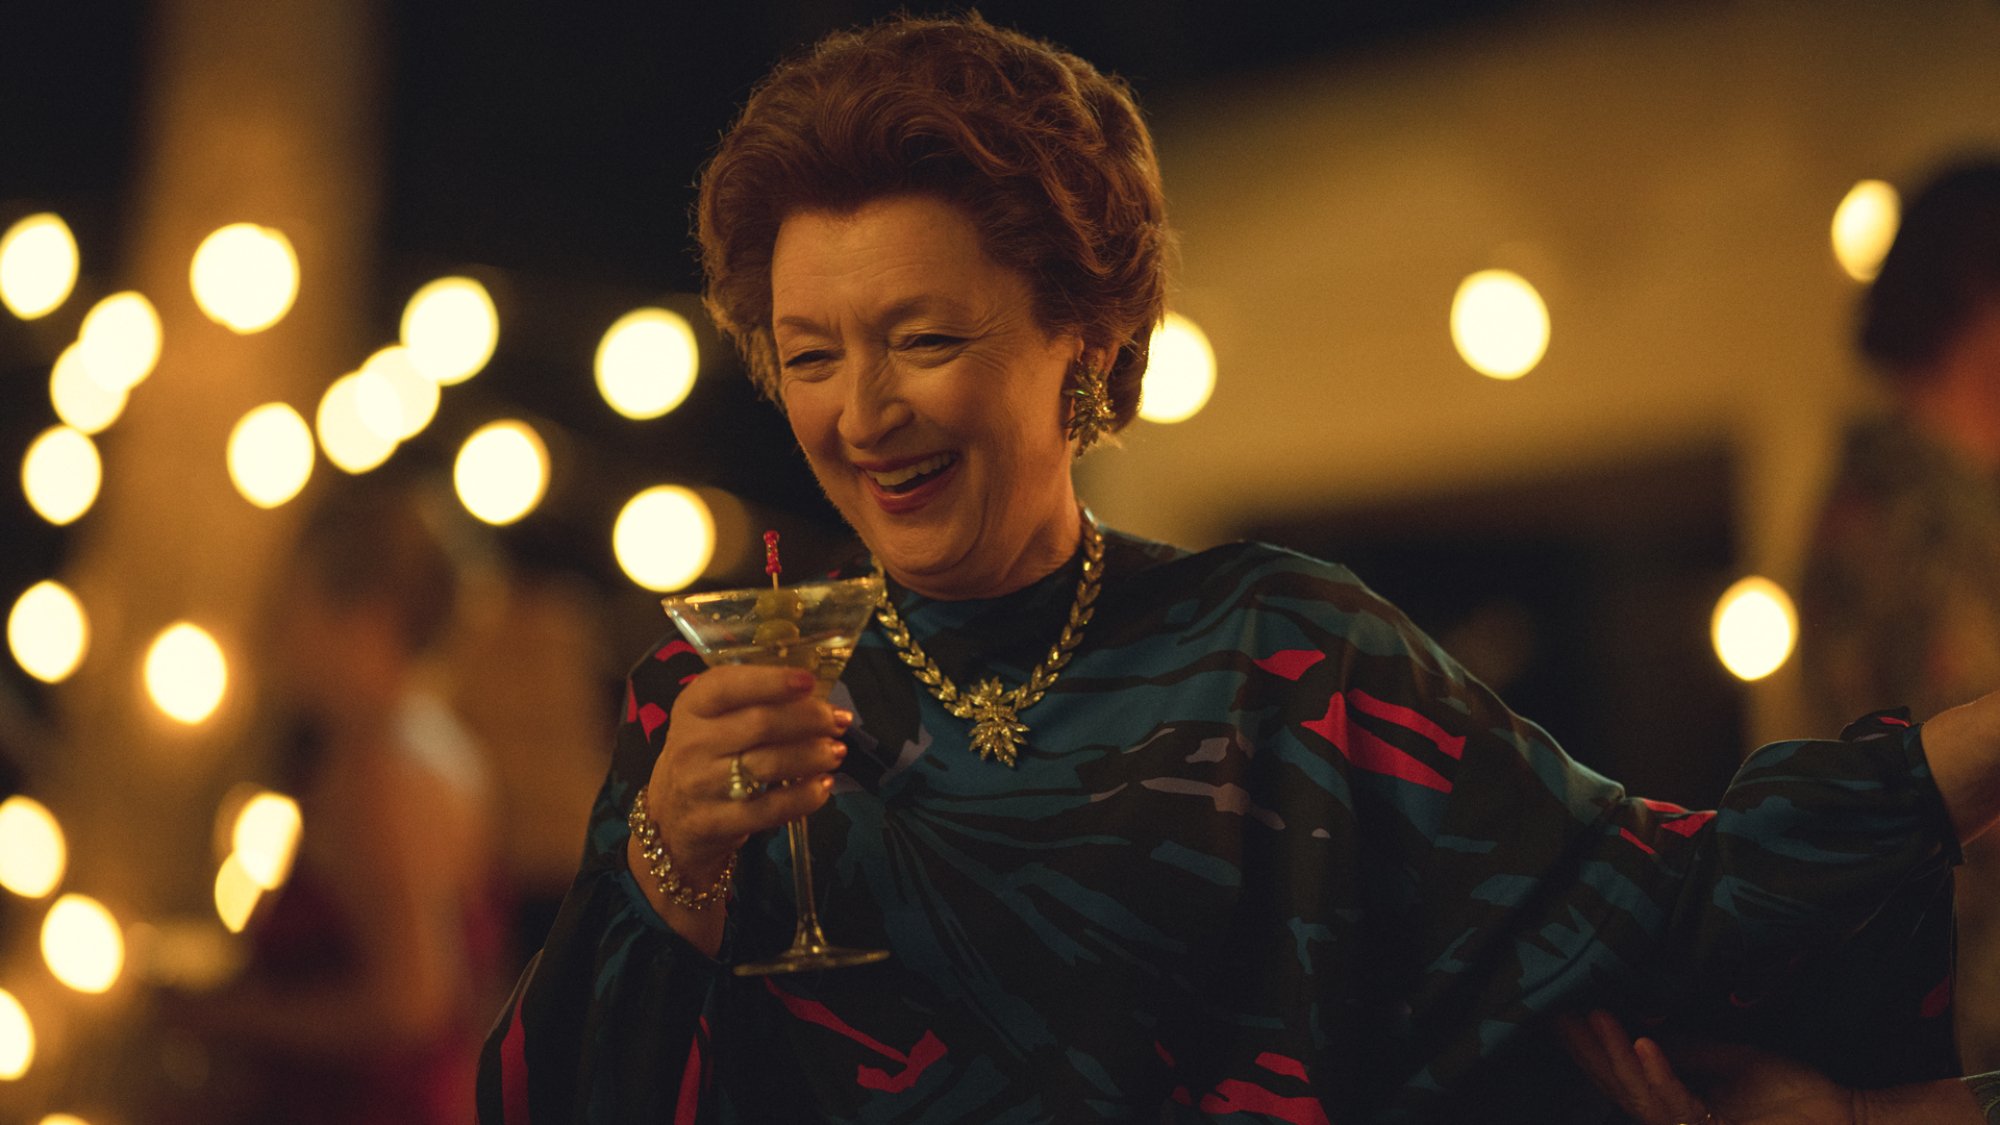 Lesley Manville as Princess Margaret drinking a cocktail at a party.